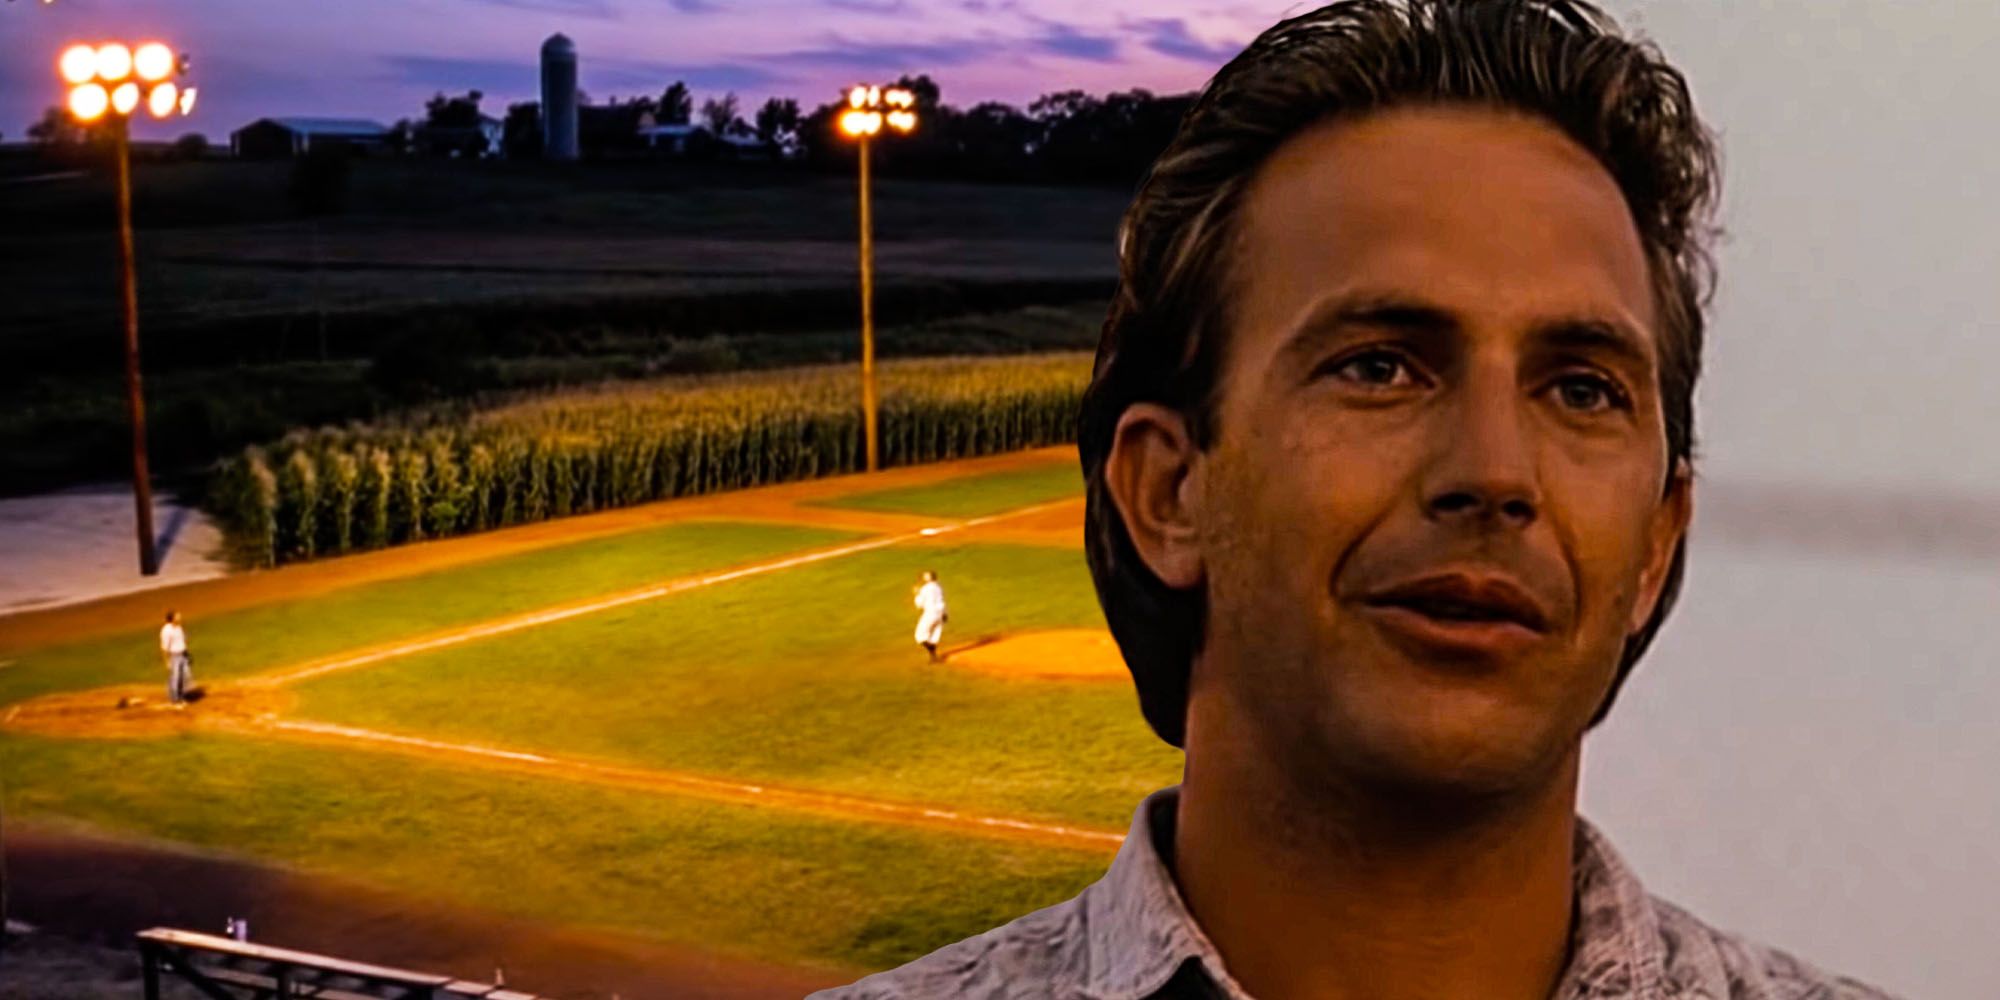 Field of Dreams' Movie Facts